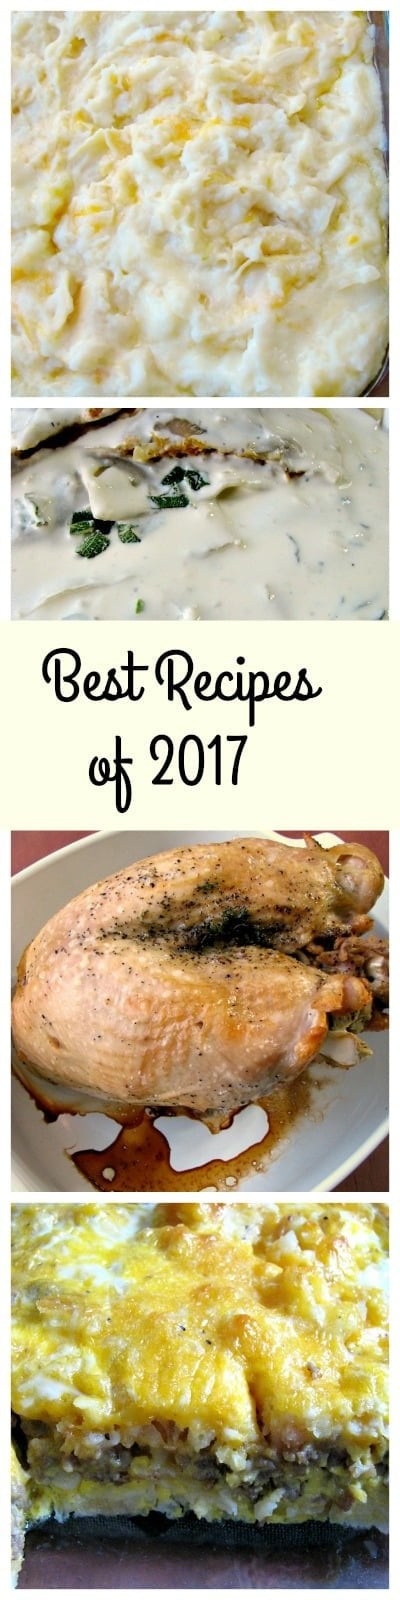 The Best Recipes of 2017 (Fall) including American Pierogi Casserole, Pumpkin Ravioli with Parmesan Sage Cream Sauce, Slow Cooker Turkey Breast with Gravy, and Sausage Hashbrown Breakfast Casserole. 